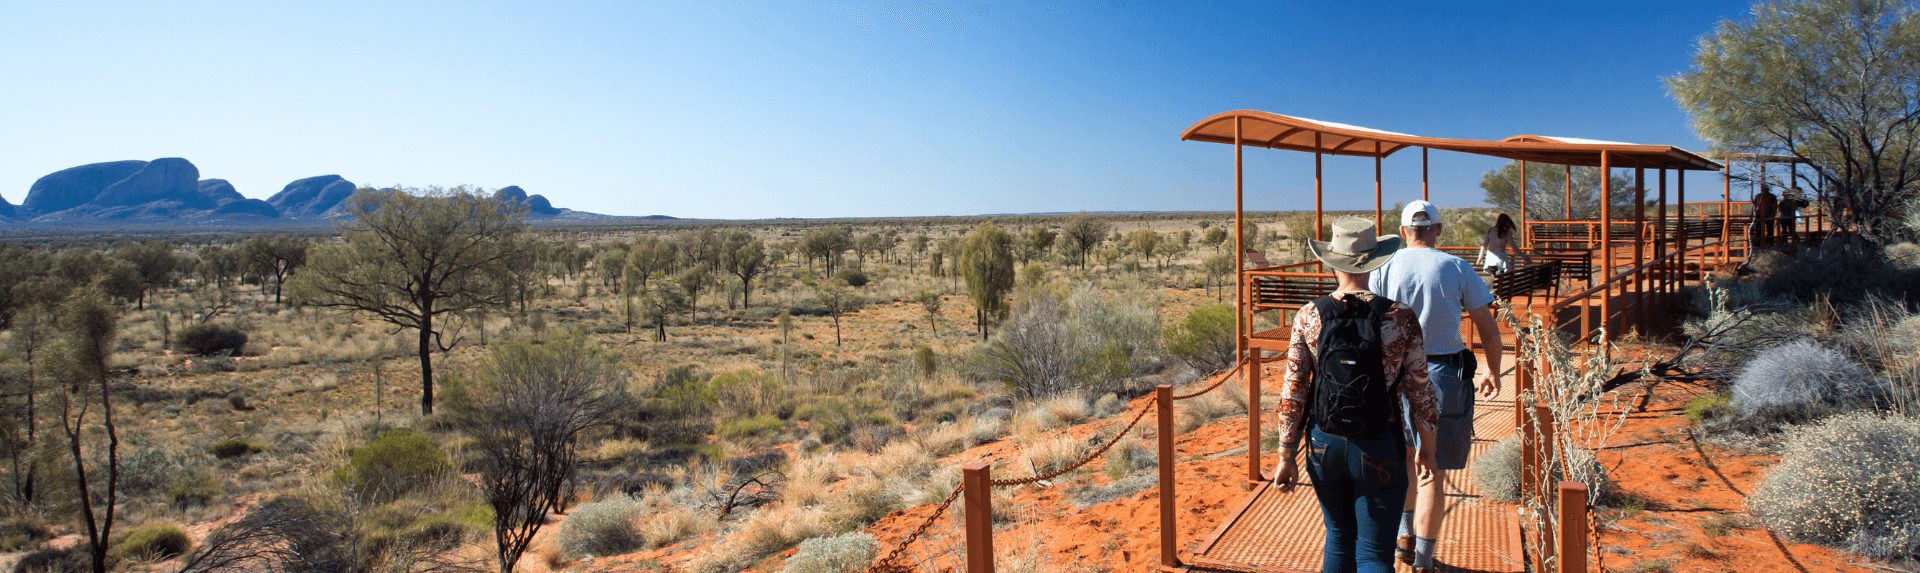 4 Day Ayers Rock & Surrounds from Alice Springs